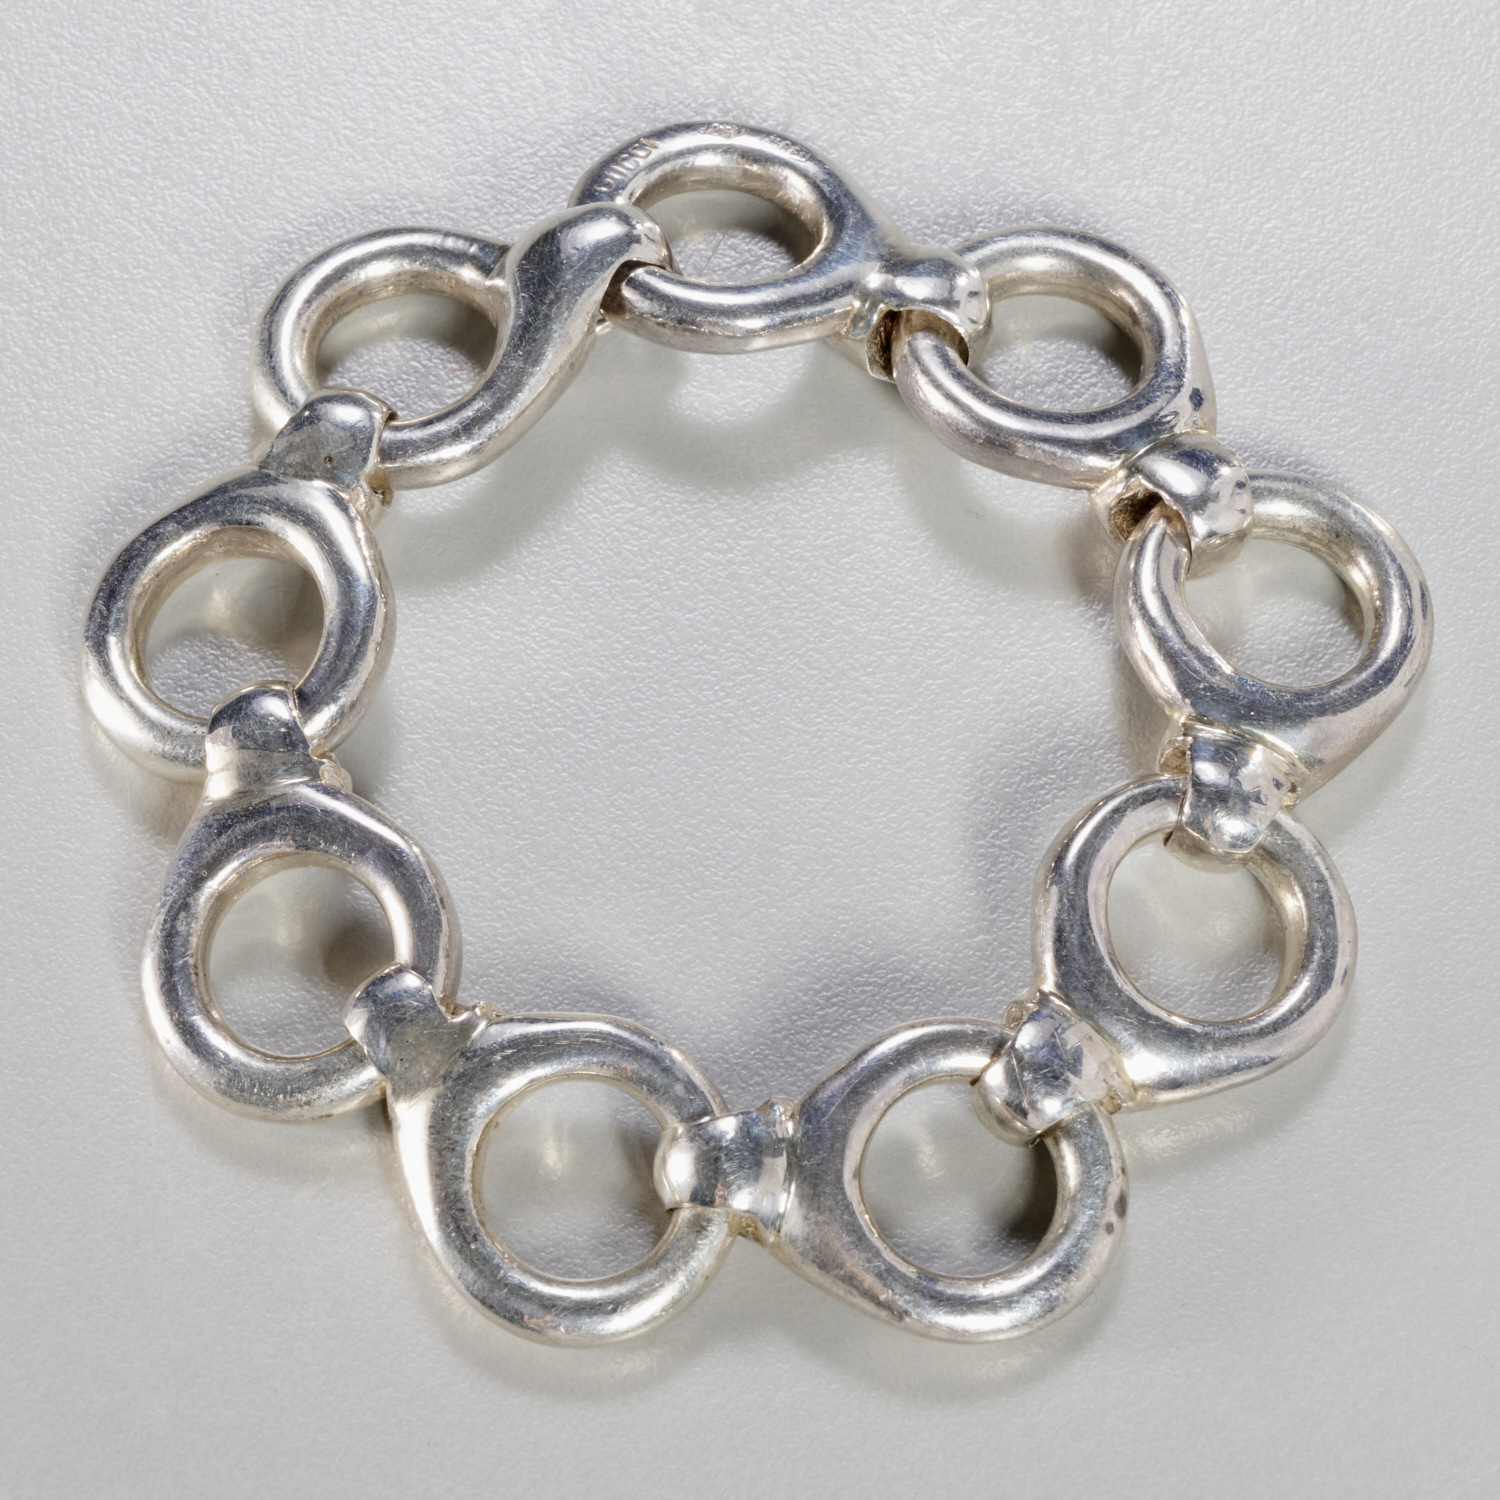 GUCCI ITALY STERLING SILVER LINK